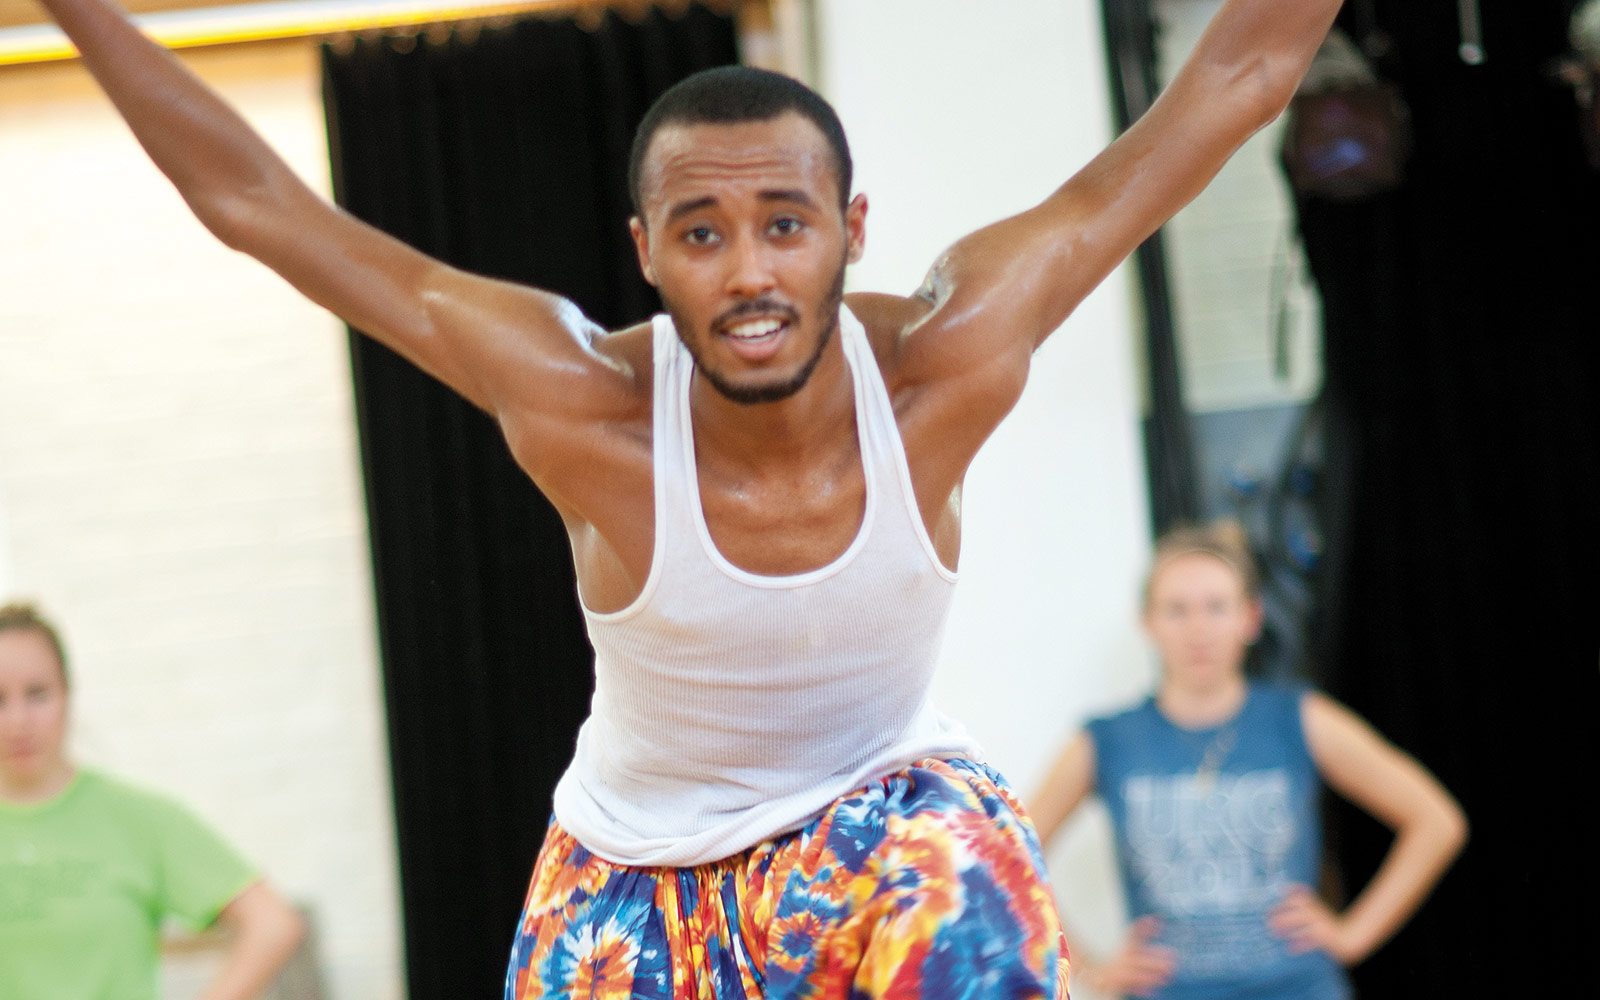 This photo was taken in an African Dance class, our first assigned shoot on campus. The dancers were so energetic.